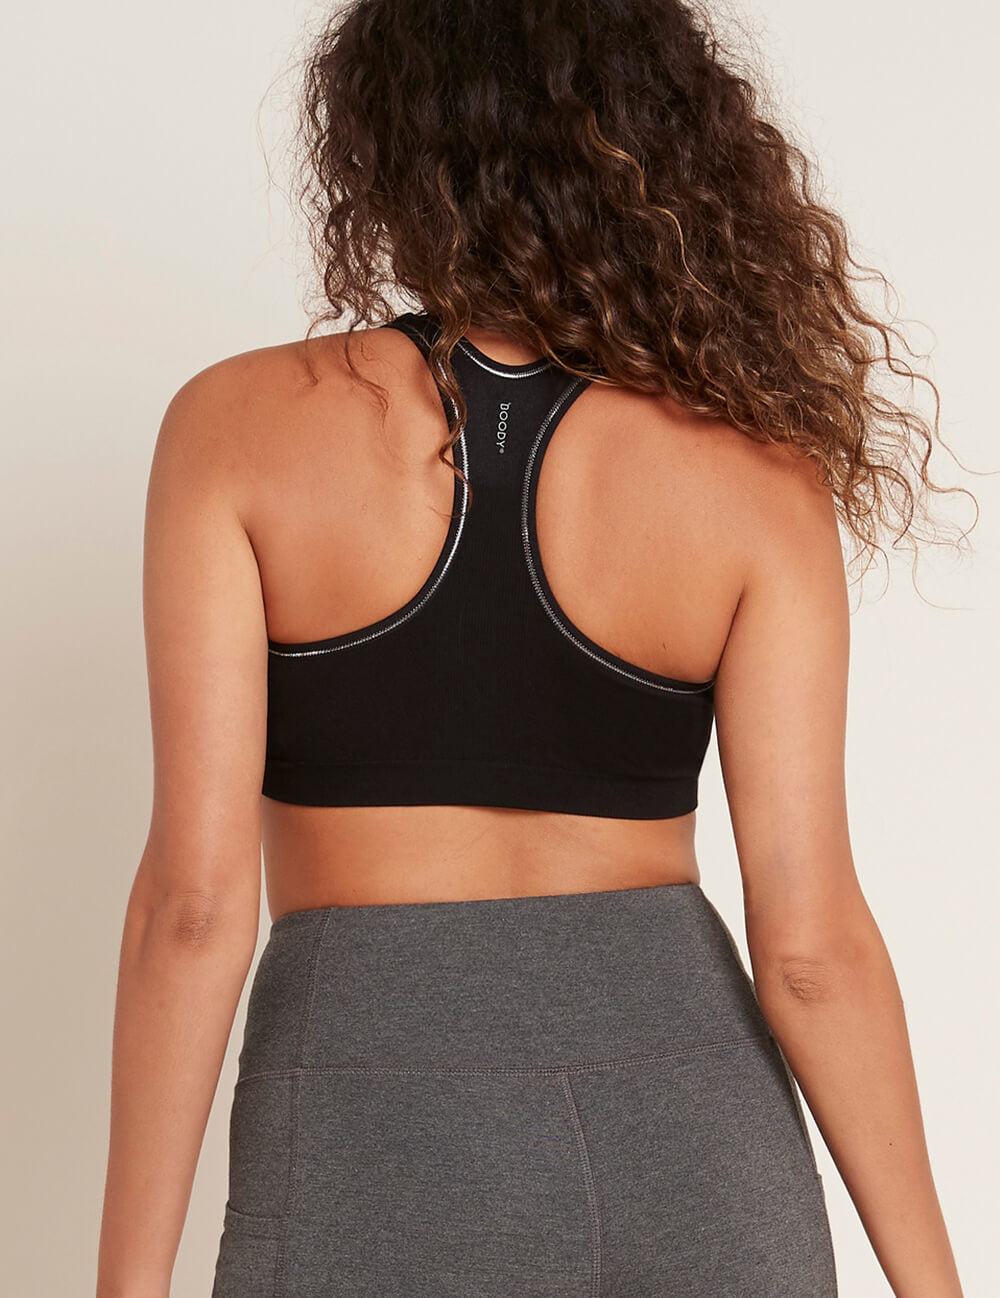 Boody Bamboo Racerback Sports Bra in Black with Silver Stitch Back View